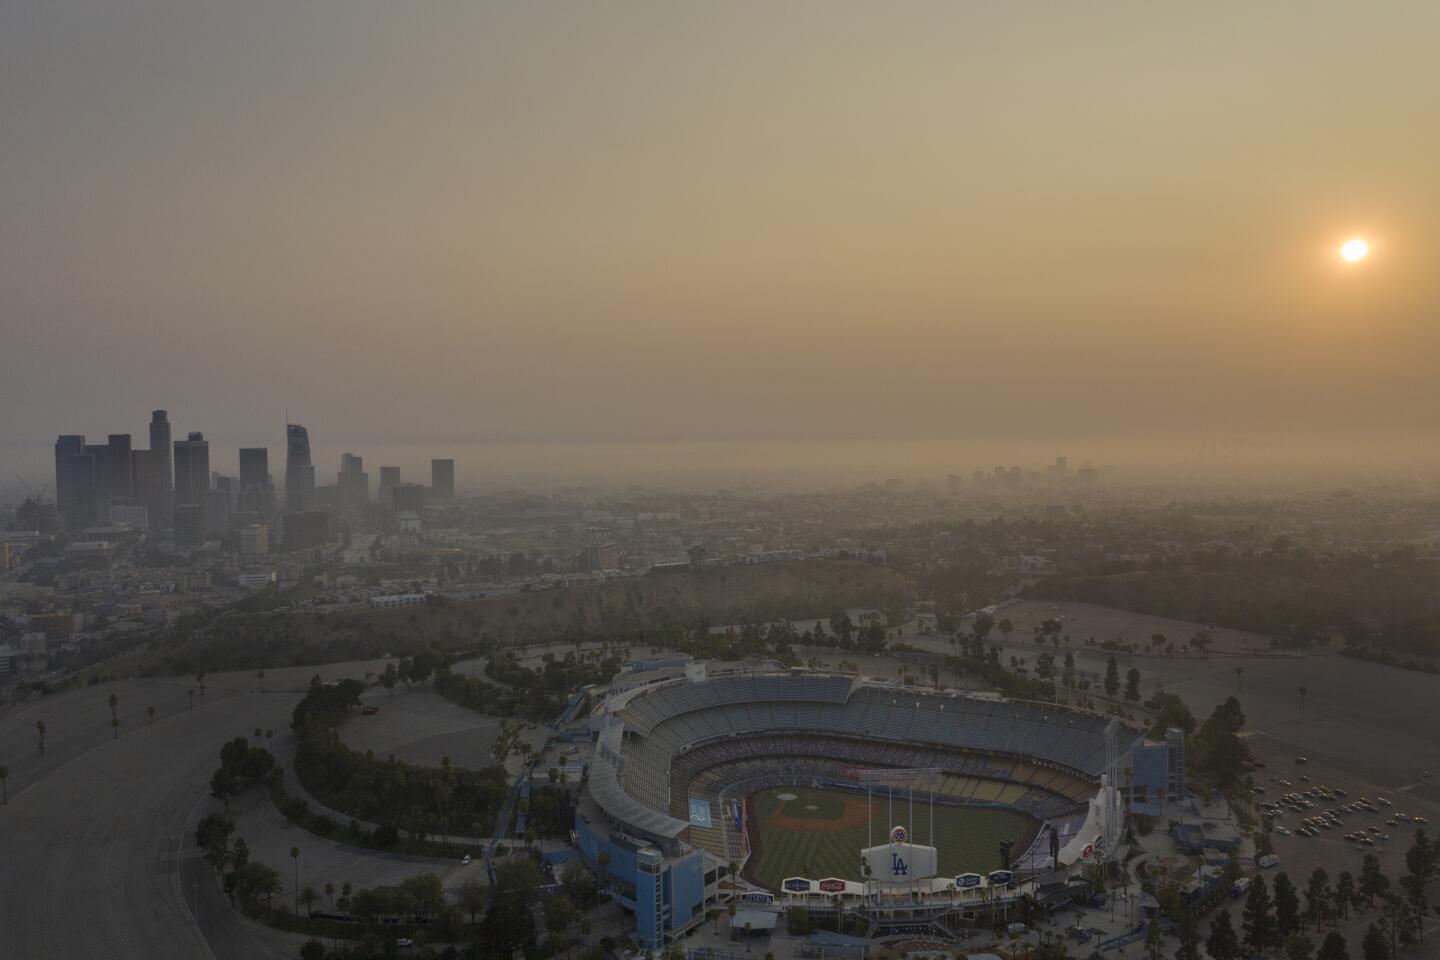 An aerial view of Dodger Stadium and the downtown Los Angeles skyline at sunset